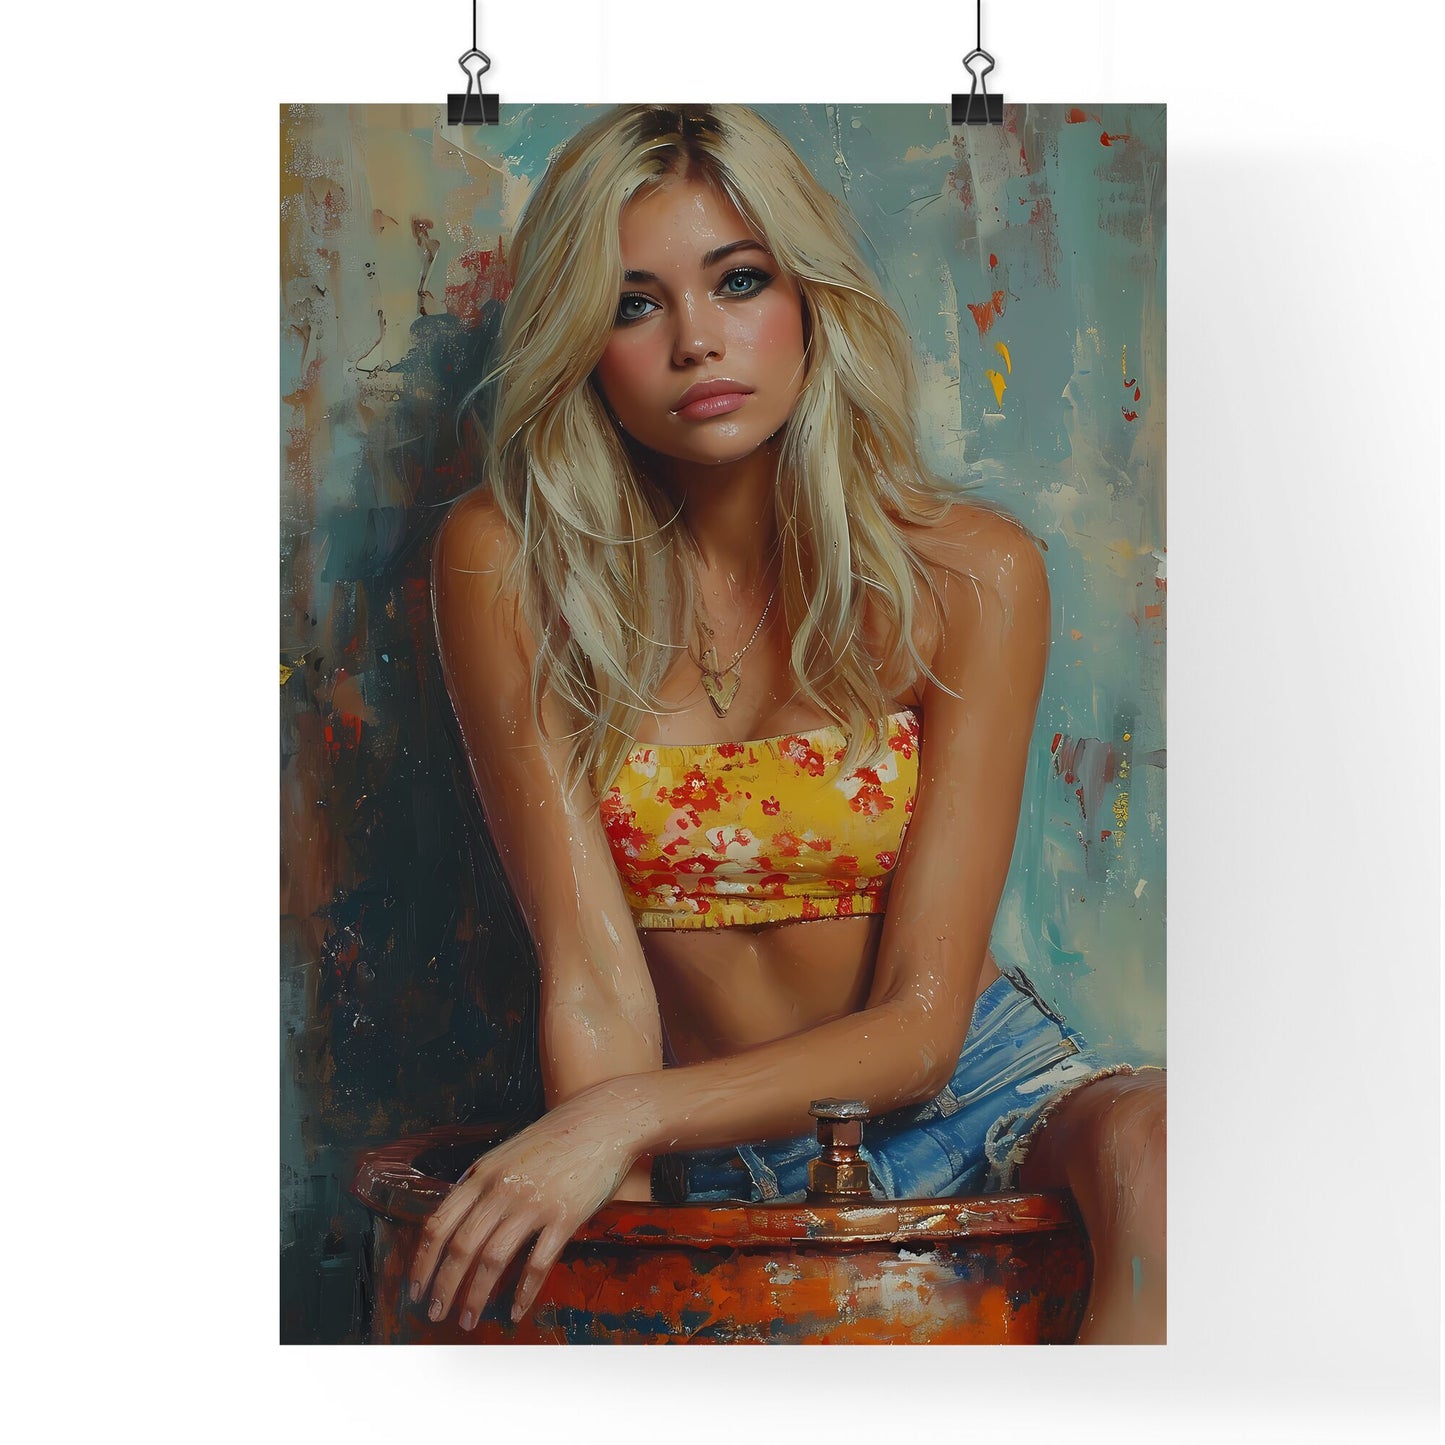 50s pin up girl sitting on top of a copper still wearing a short halter top and denim shorts - Art print of a woman sitting on a barrel Default Title